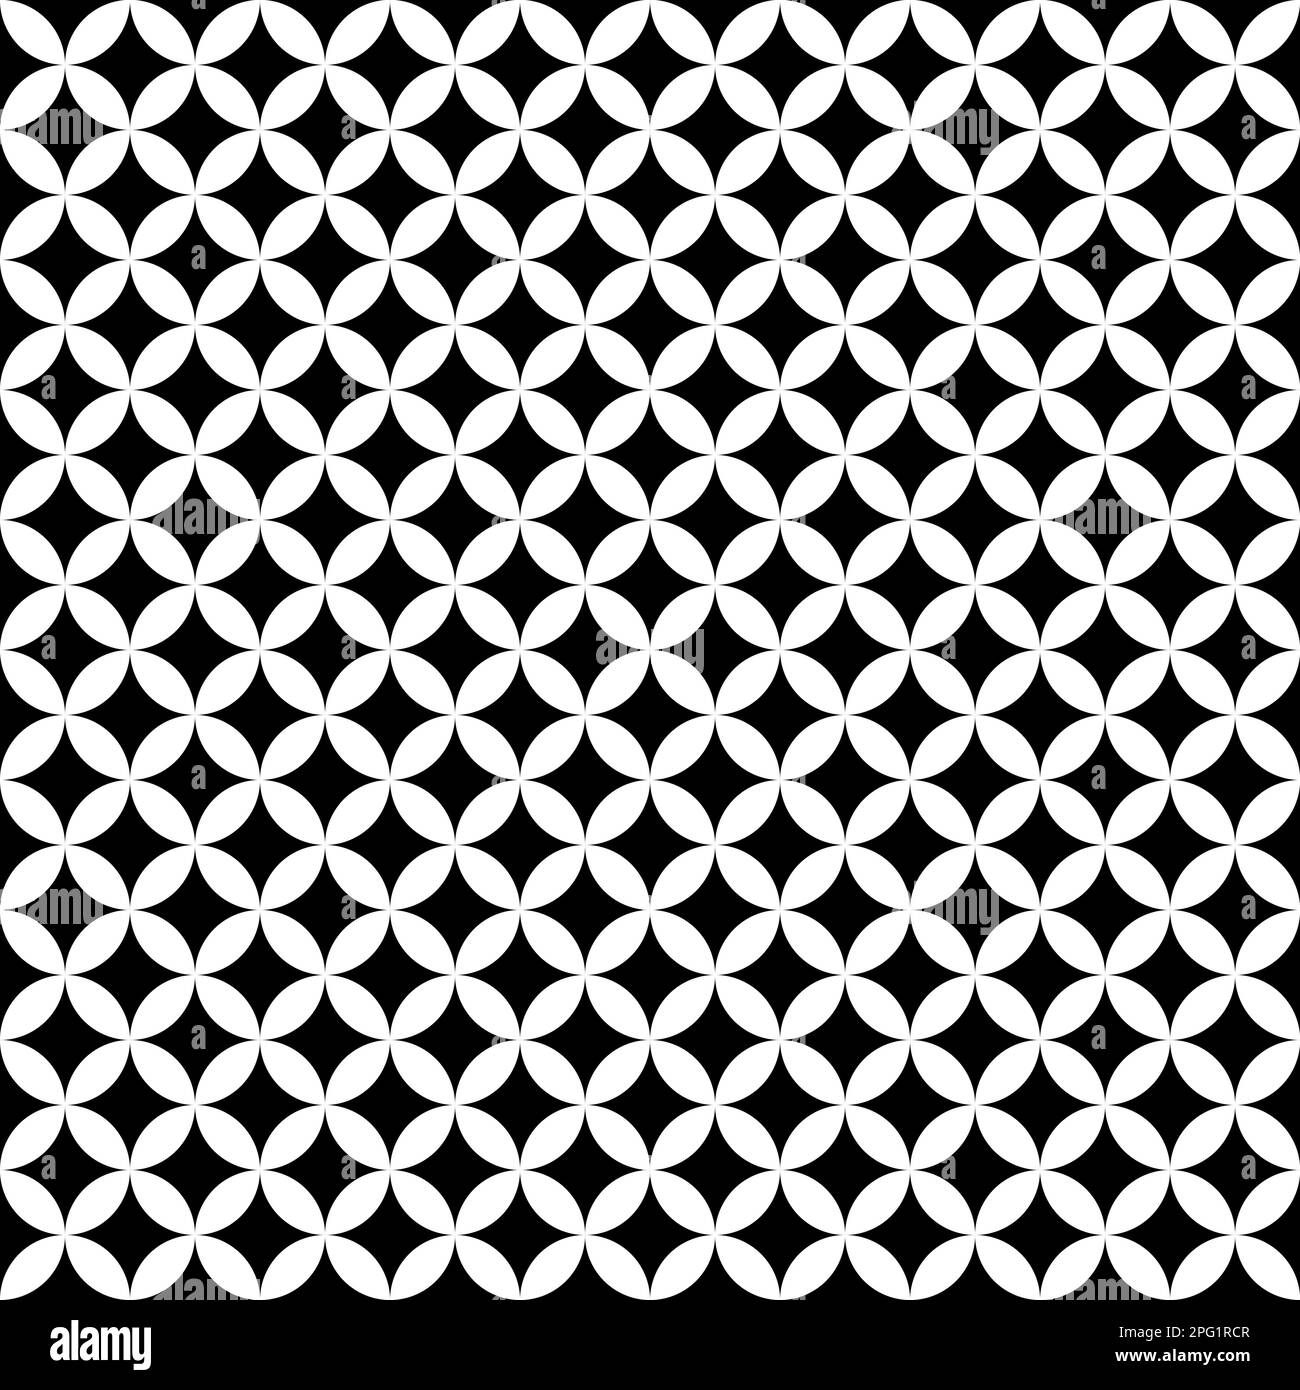 White on black overlapping circles seamless texture. Classic ovals and circles vector geometric fashion pattern. Stock Vector